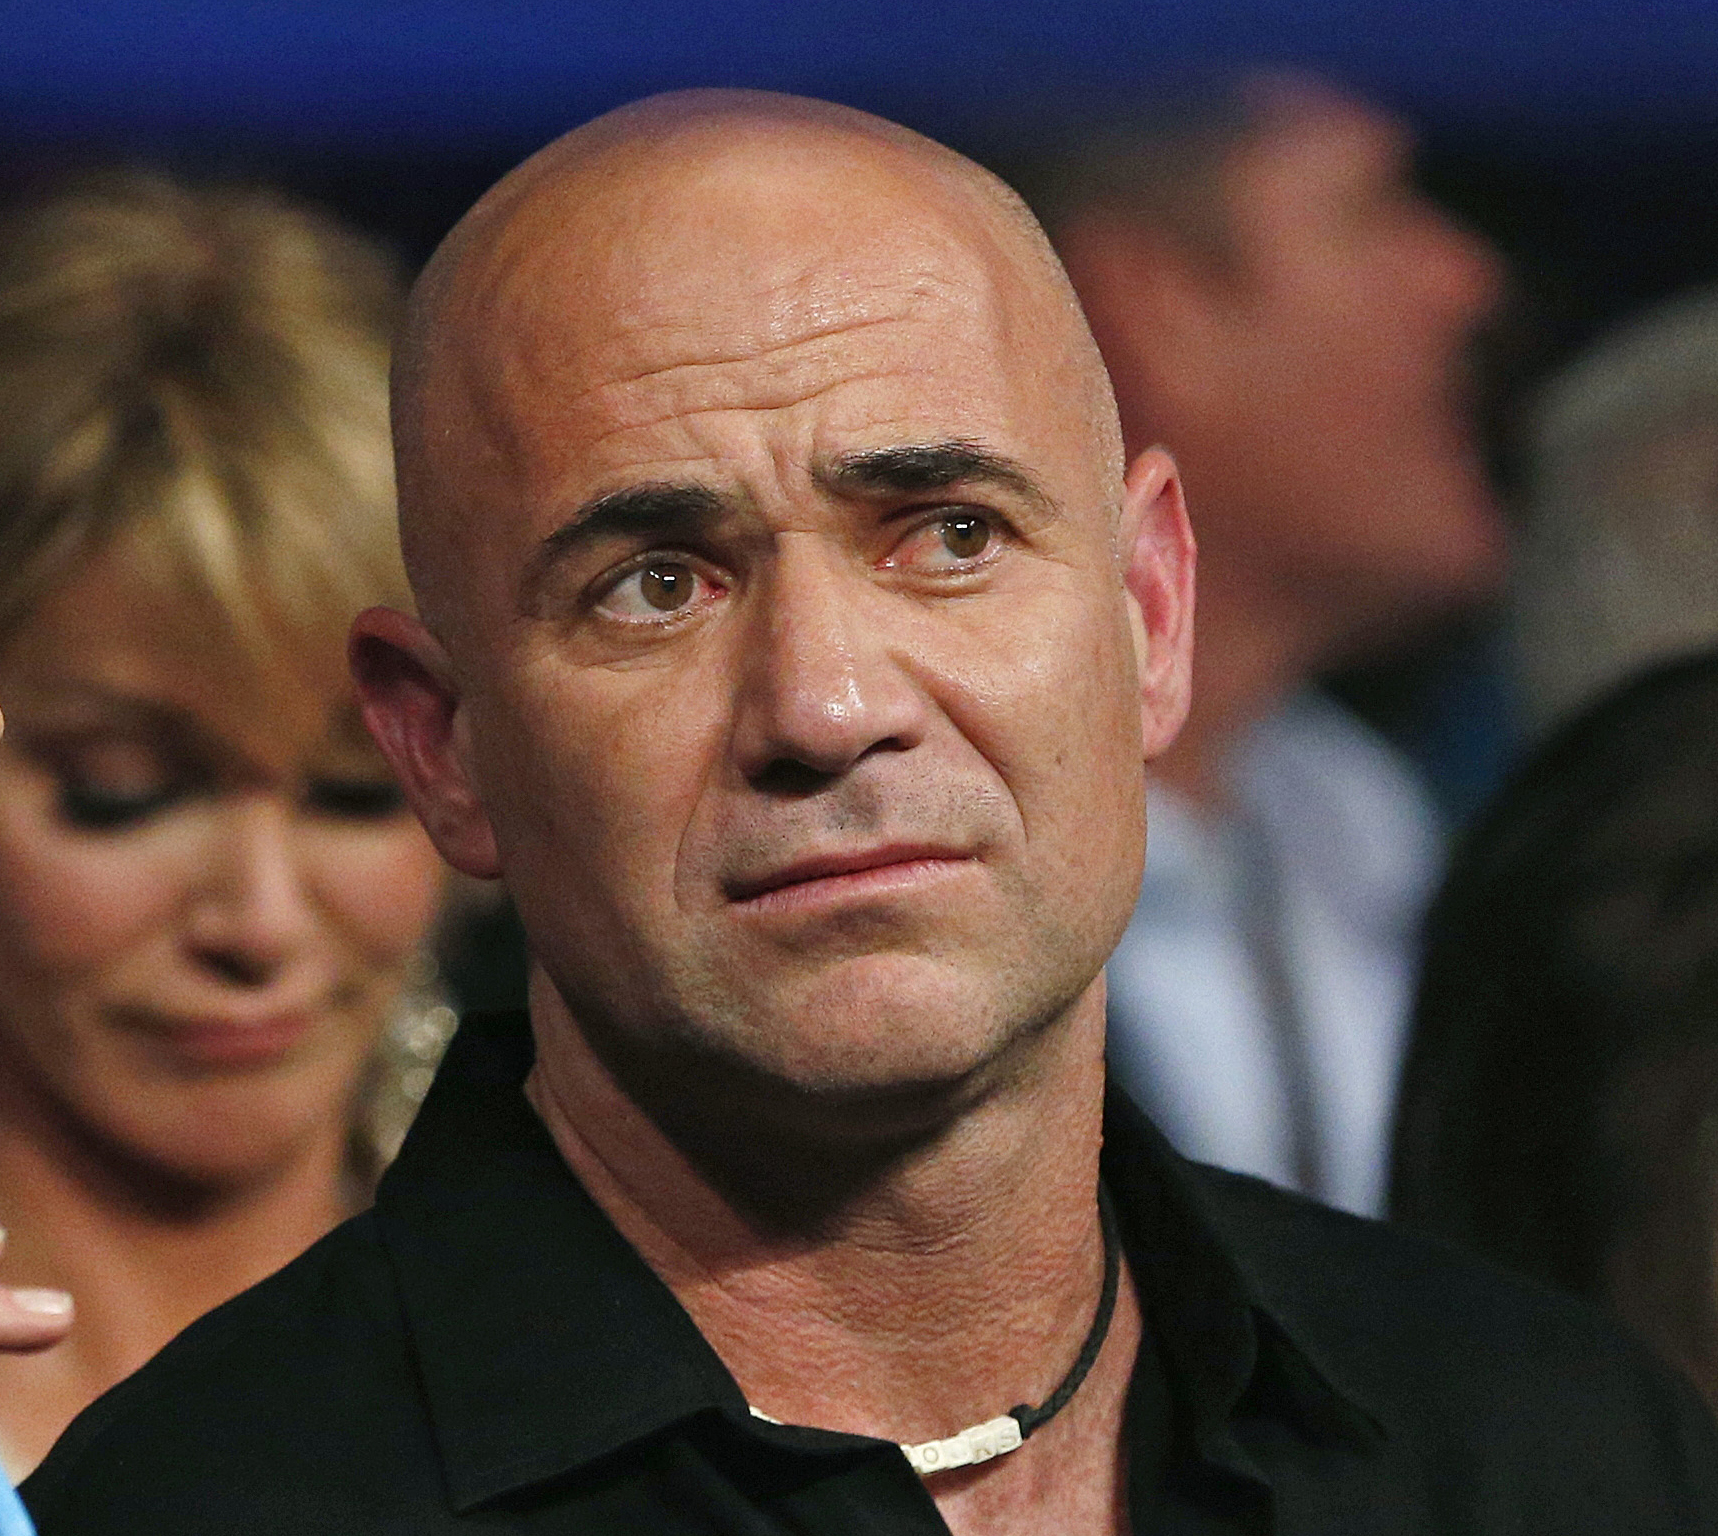 In this May 2, 2015, file photo, Andre Agassi is shown in the crowd before the world welterweight championship bout between Floyd Mayweather Jr., and Manny Pacquiao, in Las Vegas. AP file photo